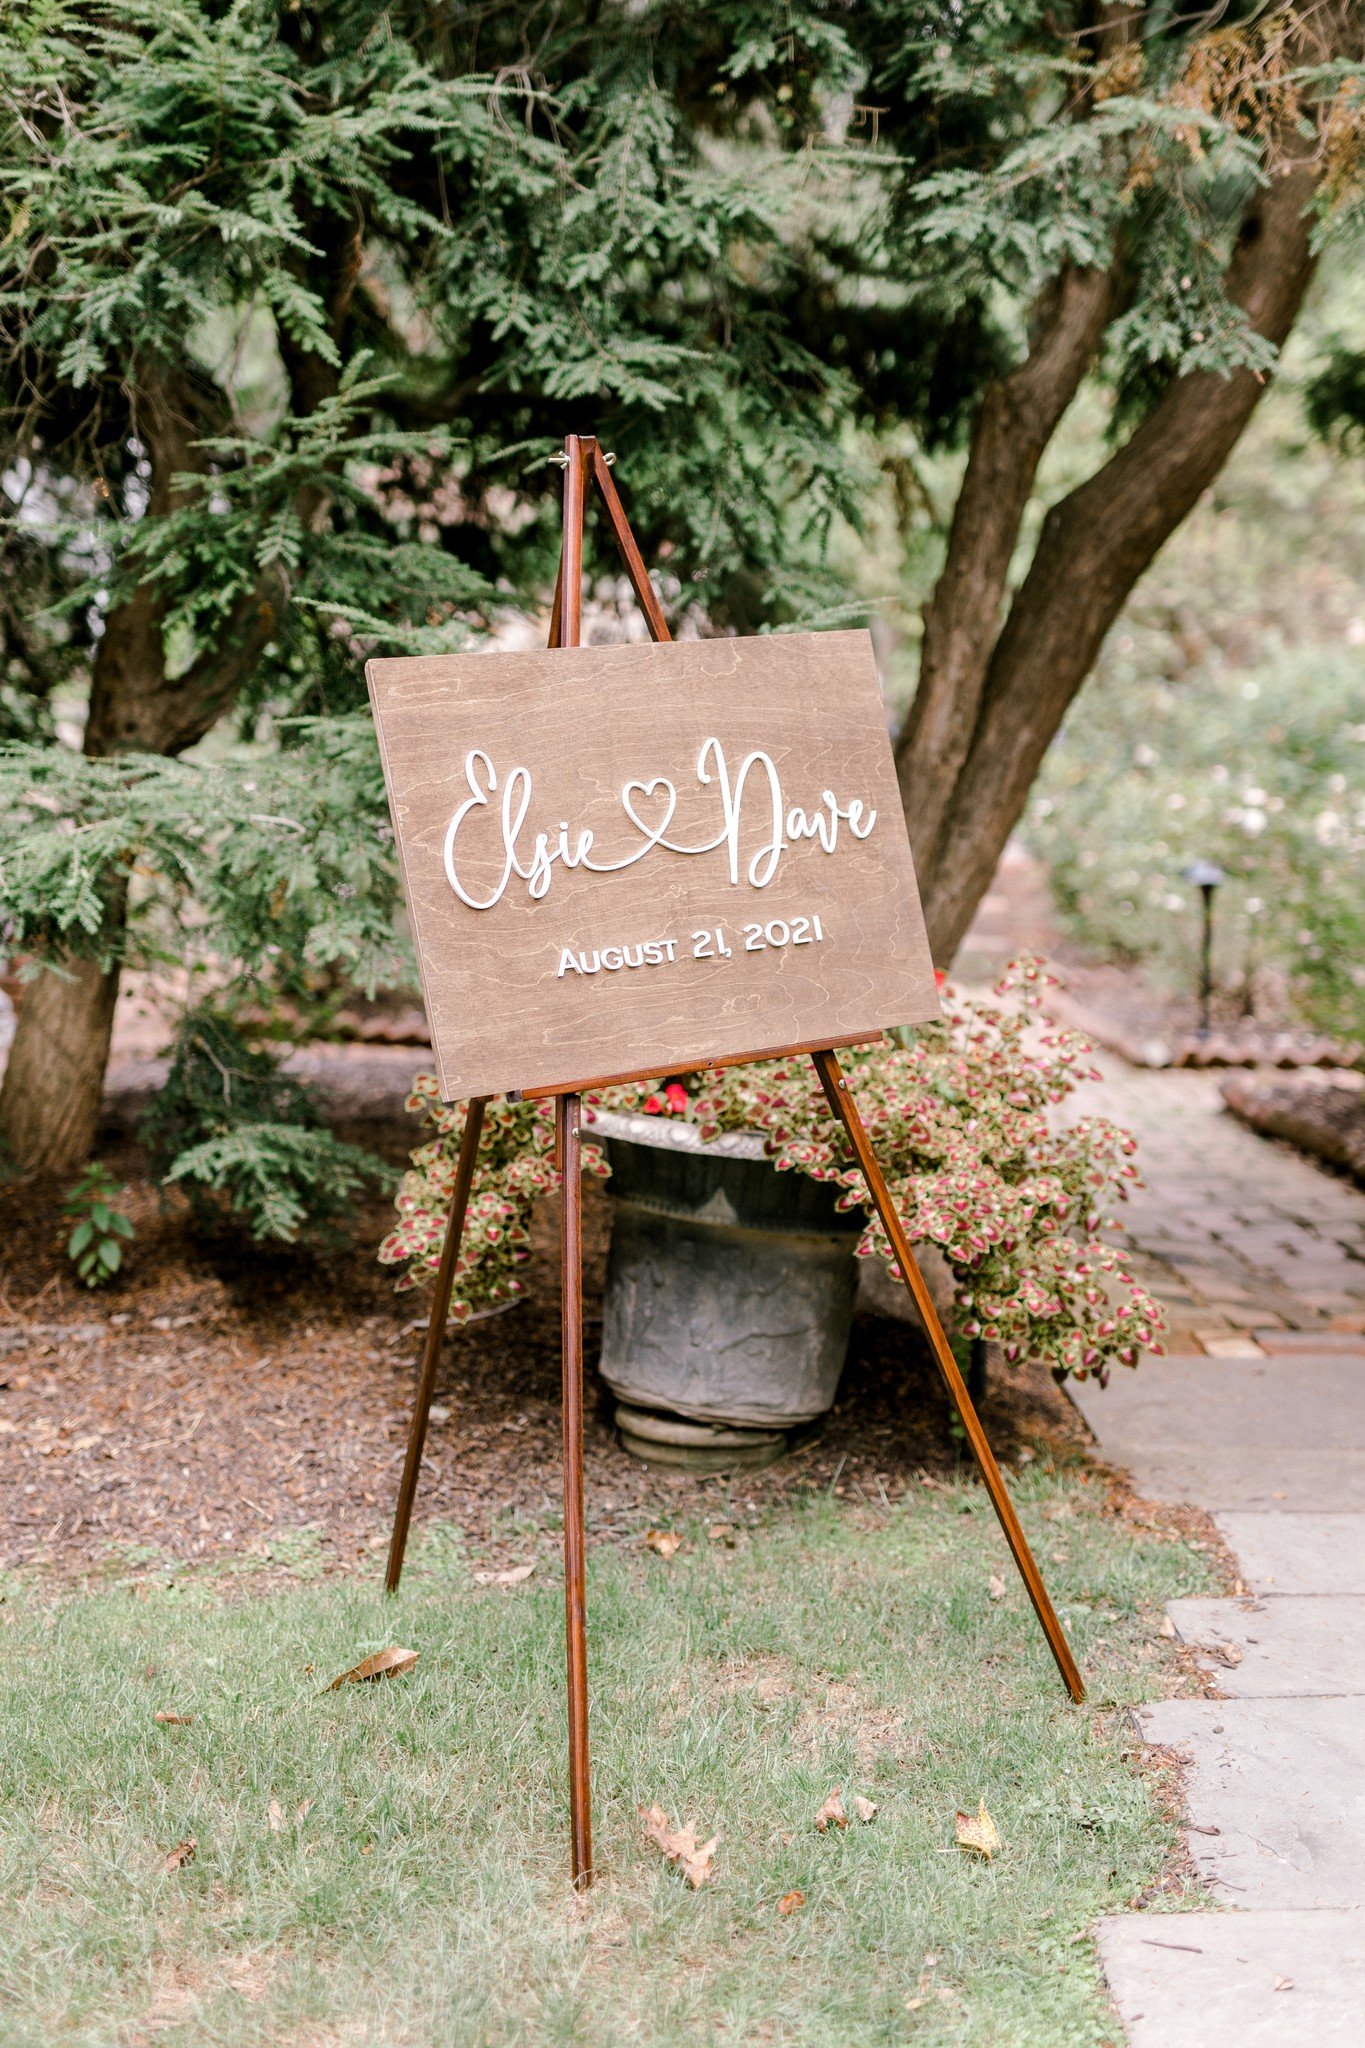 Wooden sign at wedding reception